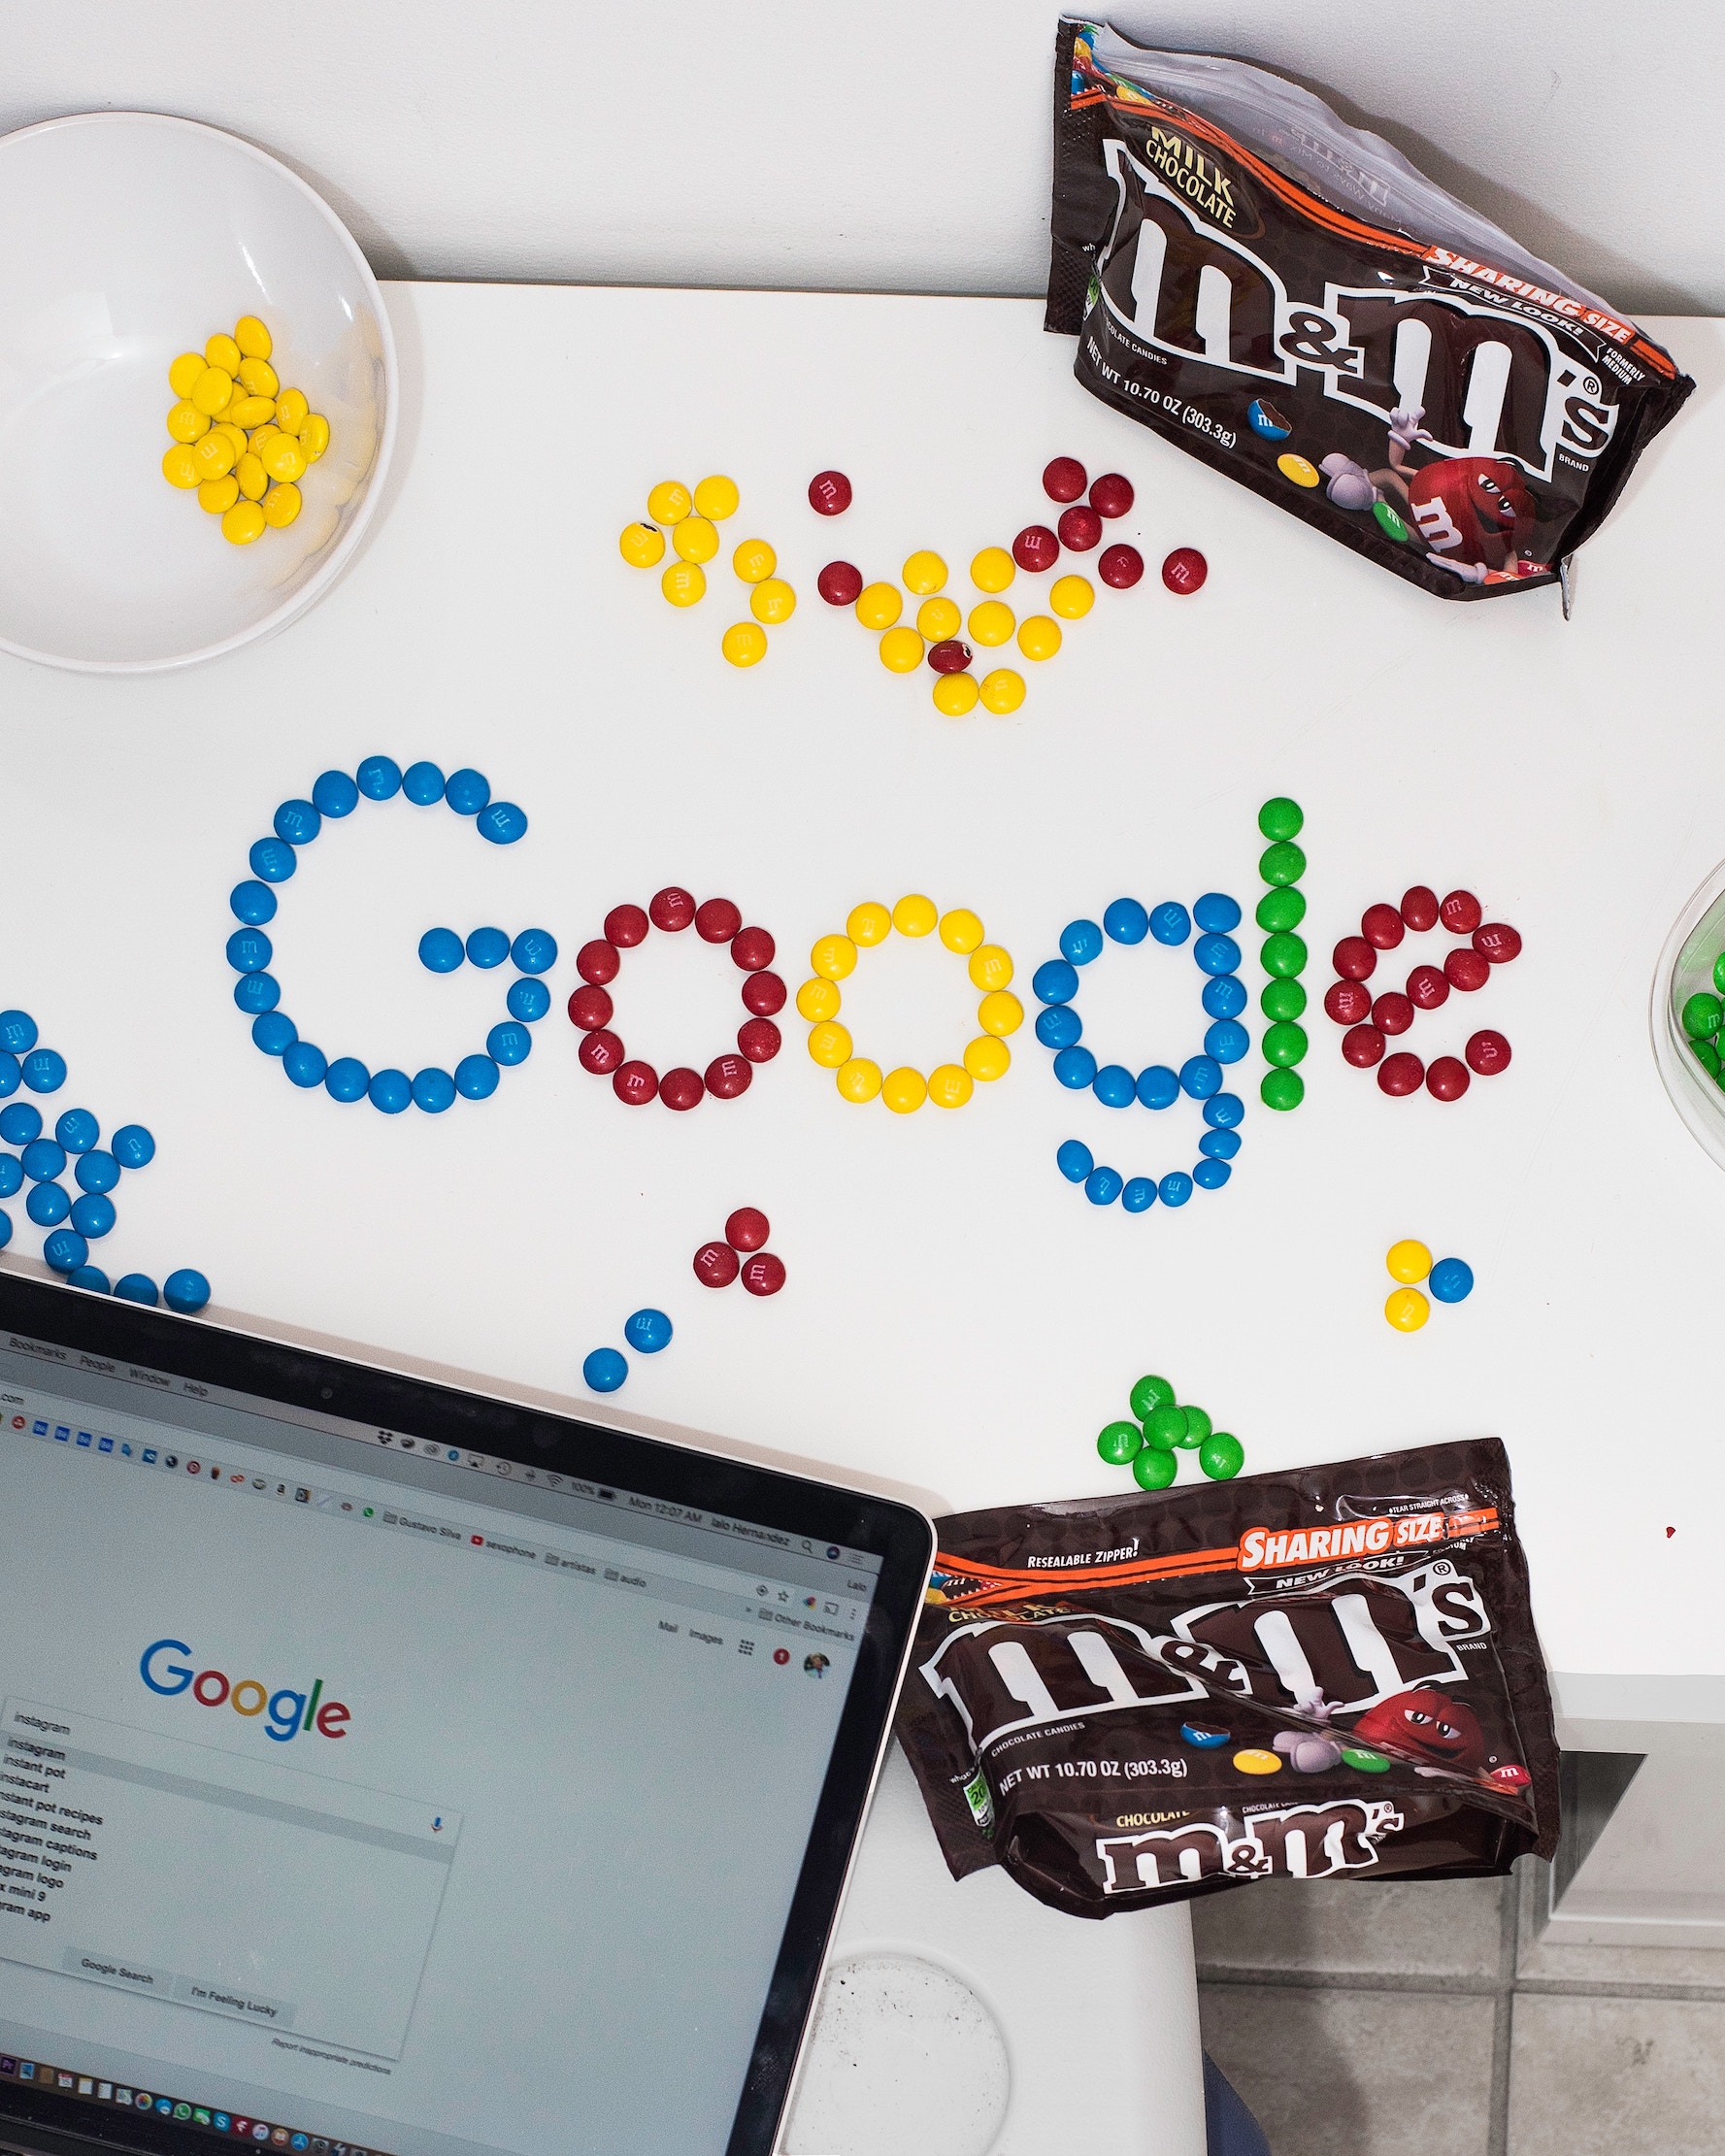 Google Logo with M&M's candy